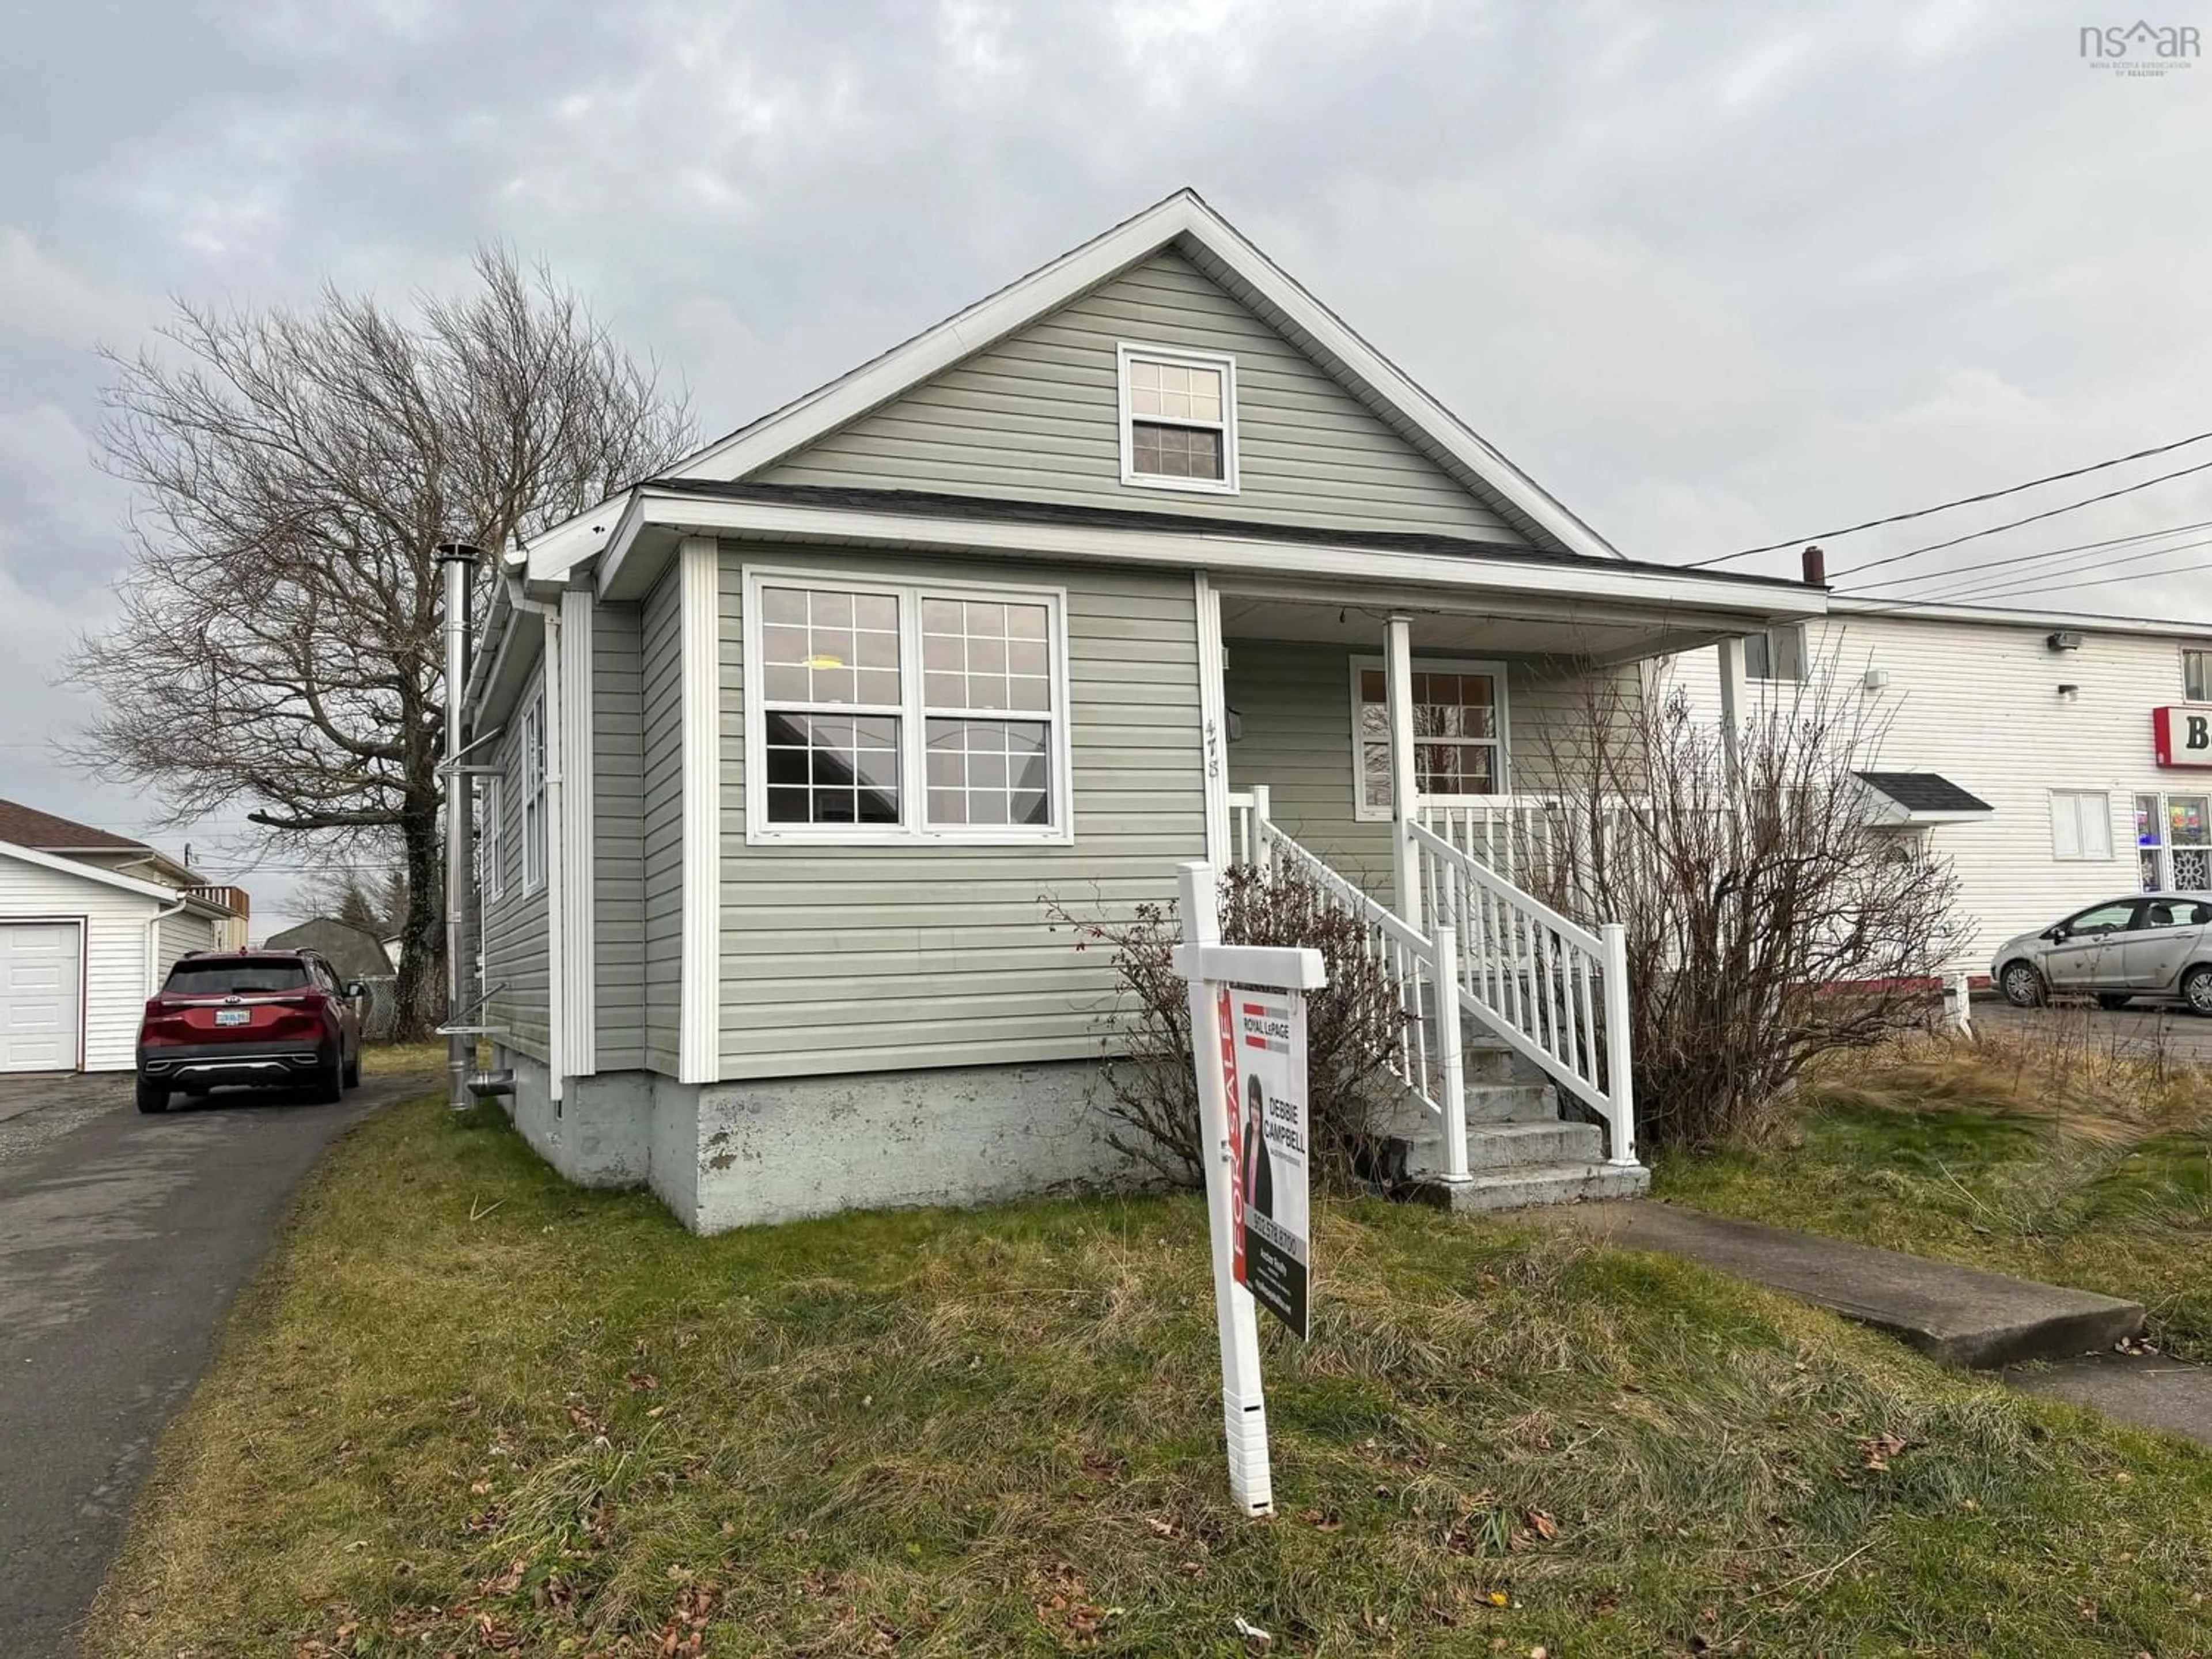 Home with unknown exterior material for 478 King St, New Waterford Nova Scotia B1H 3Y6